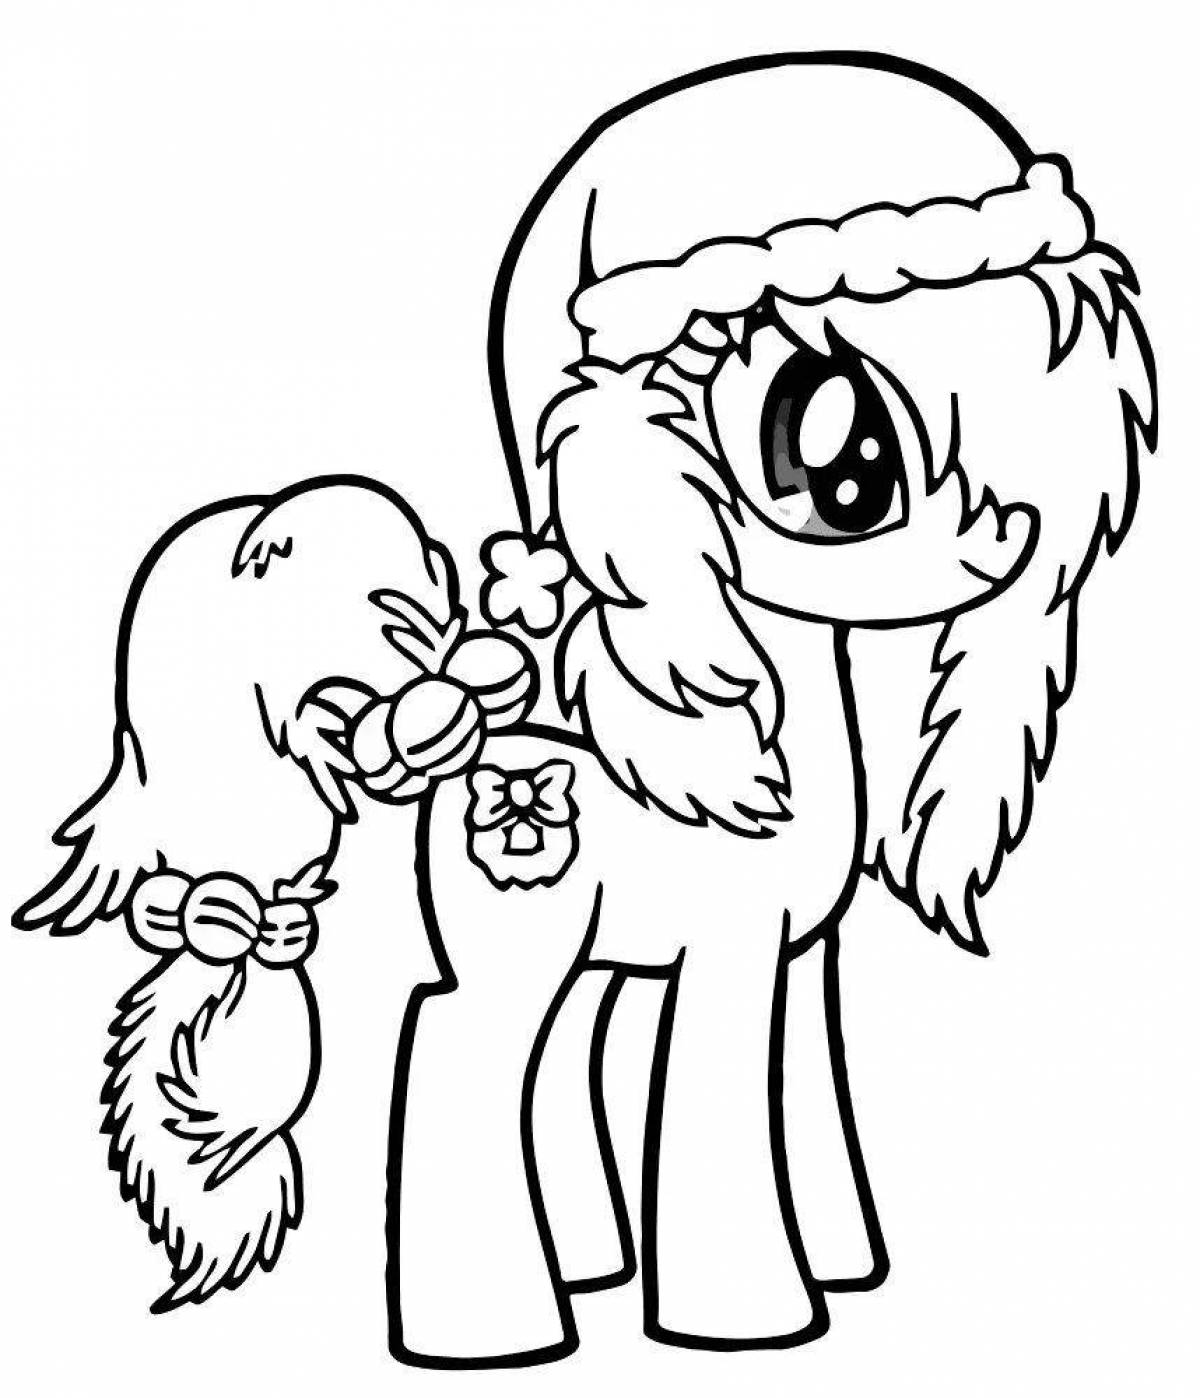 Playtime pony cuties coloring page